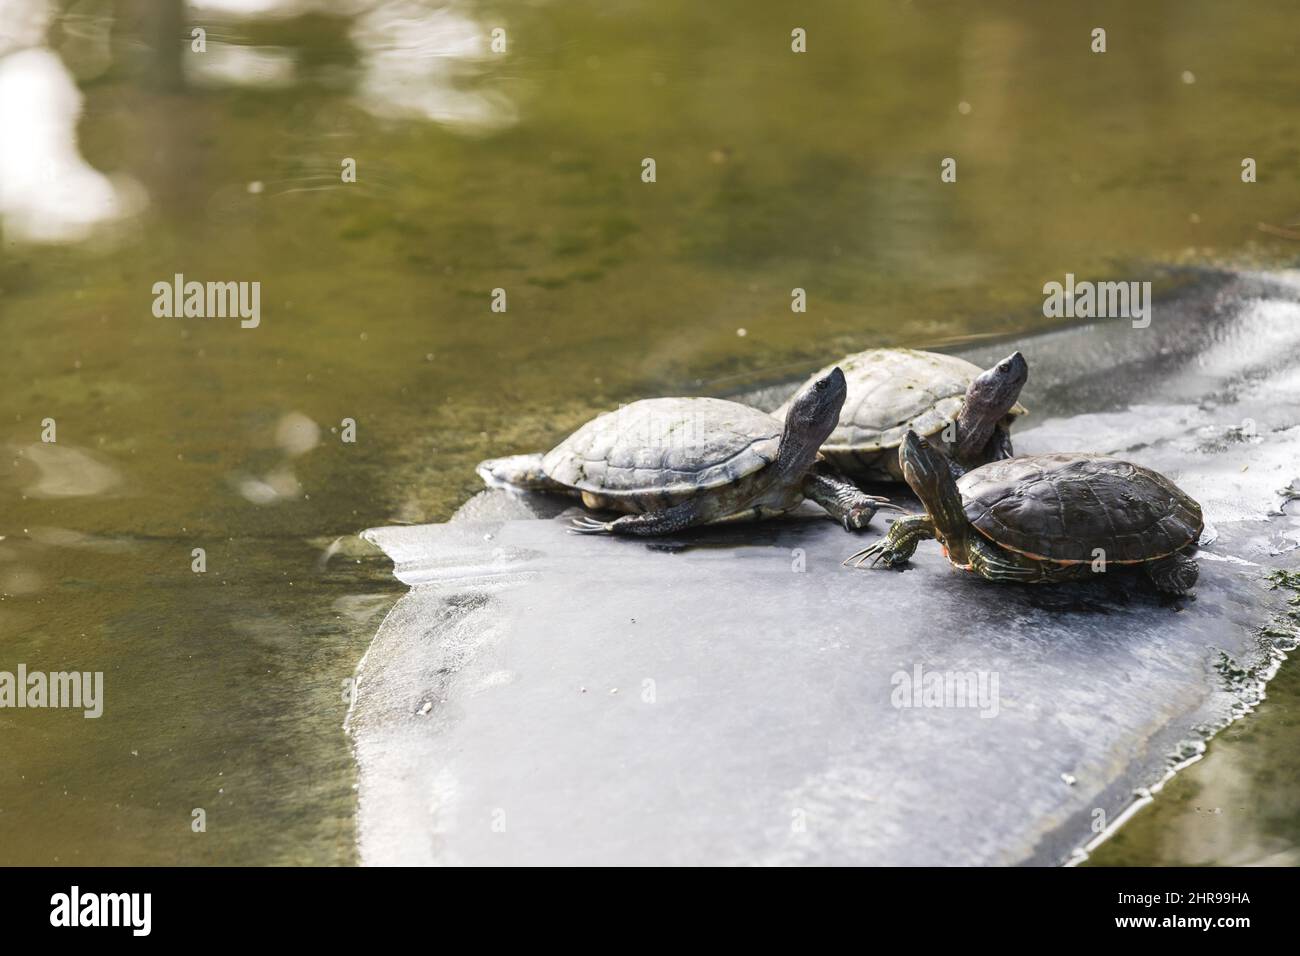 Three turtles sitting on a stone in small wild pond. Dominican Republic natural photo Stock Photo